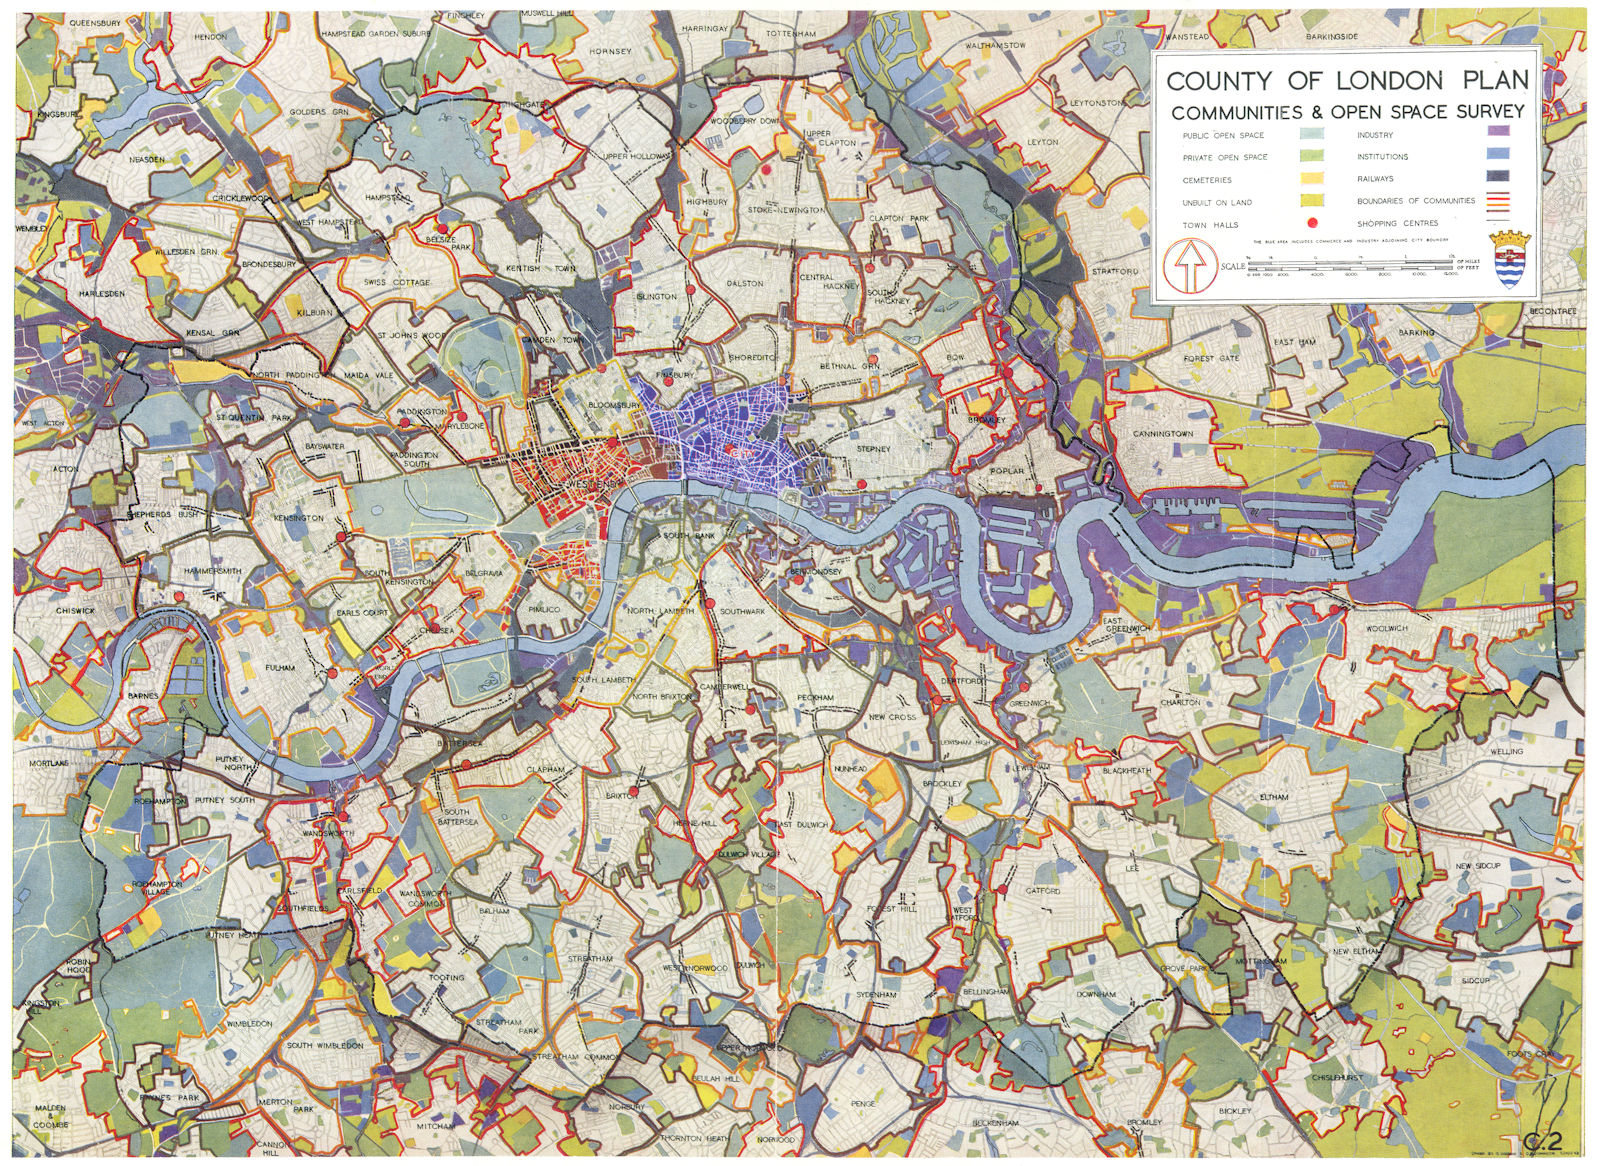 Associate Product LONDON. County of London plan communities & open space survey 1943 old map